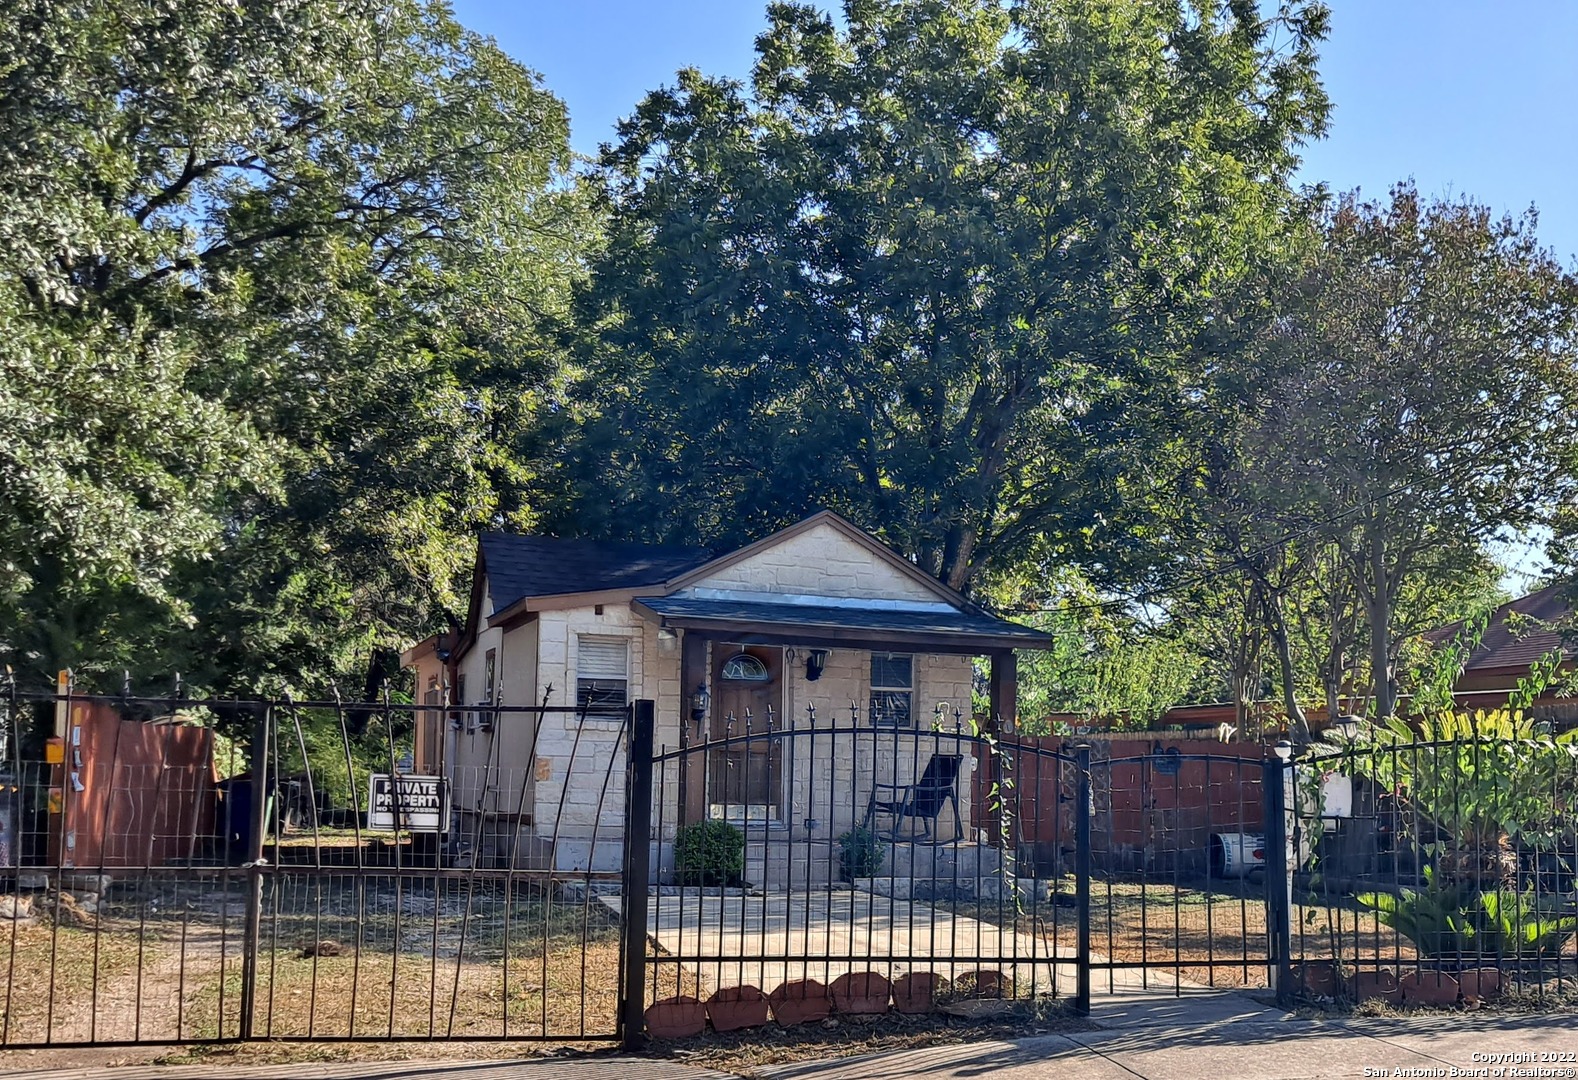 This one is all about LOCATION! Cute 2 BR Home, needs some TLC...SOLD AS-IS, Owner does NOT have survey - buyer must purchase. Come see it before it's gone! Nice size lot, roof is 1 yr old, iron front fence, gas stove in kitchen, mature trees, some trees are Pecan, South of Southtown, just 5 minutes from downtown, Mission reach bike/walking trail only 1 block away, Riverside golf course just 1 block away,  Mission Concepcion Park 3 minutes away. Morrill elementary less half a mile down the road. Both vehicles on the property will be removed before closing.